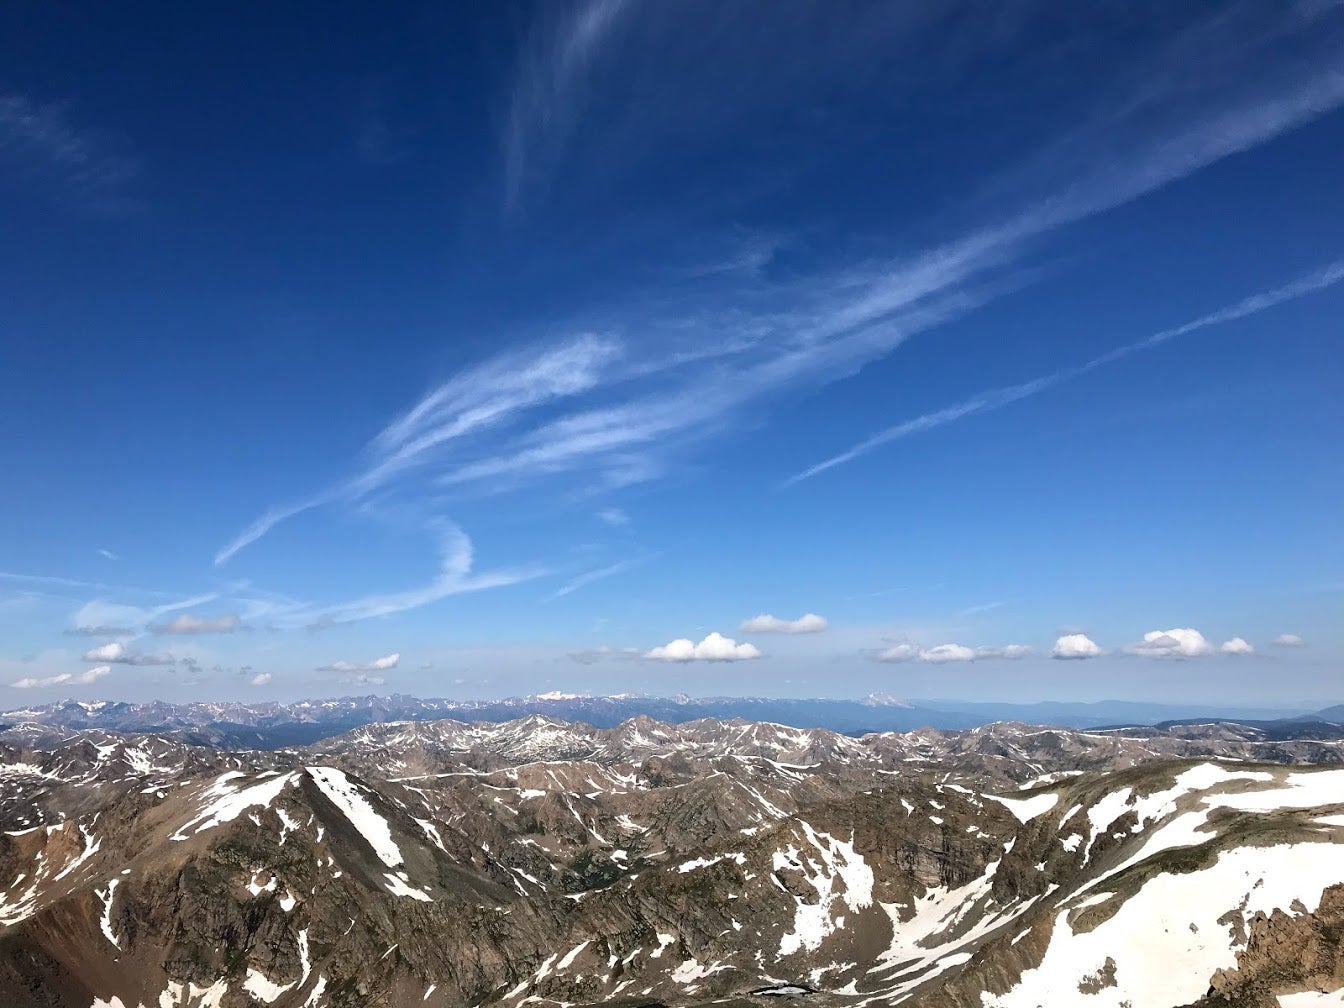 The views from the SE slope of Mt. Massive are incredible.